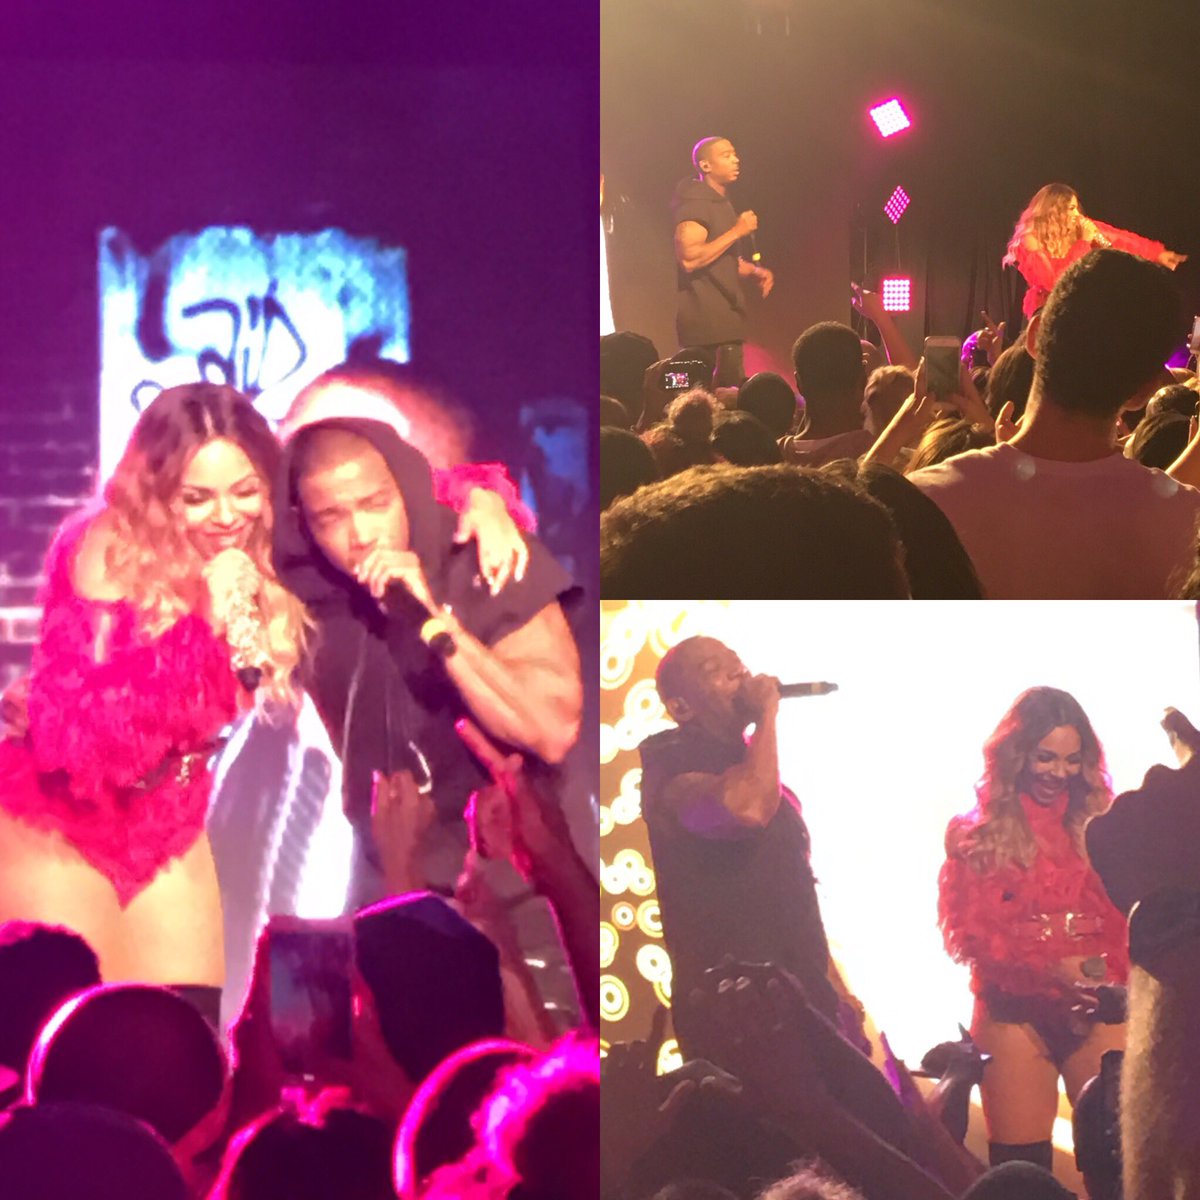 RT @WesSideOfSports: Had a great time at the @ashanti and @Ruleyork concert #NaturalBornHittersTour https://t.co/XZUay8sBlK